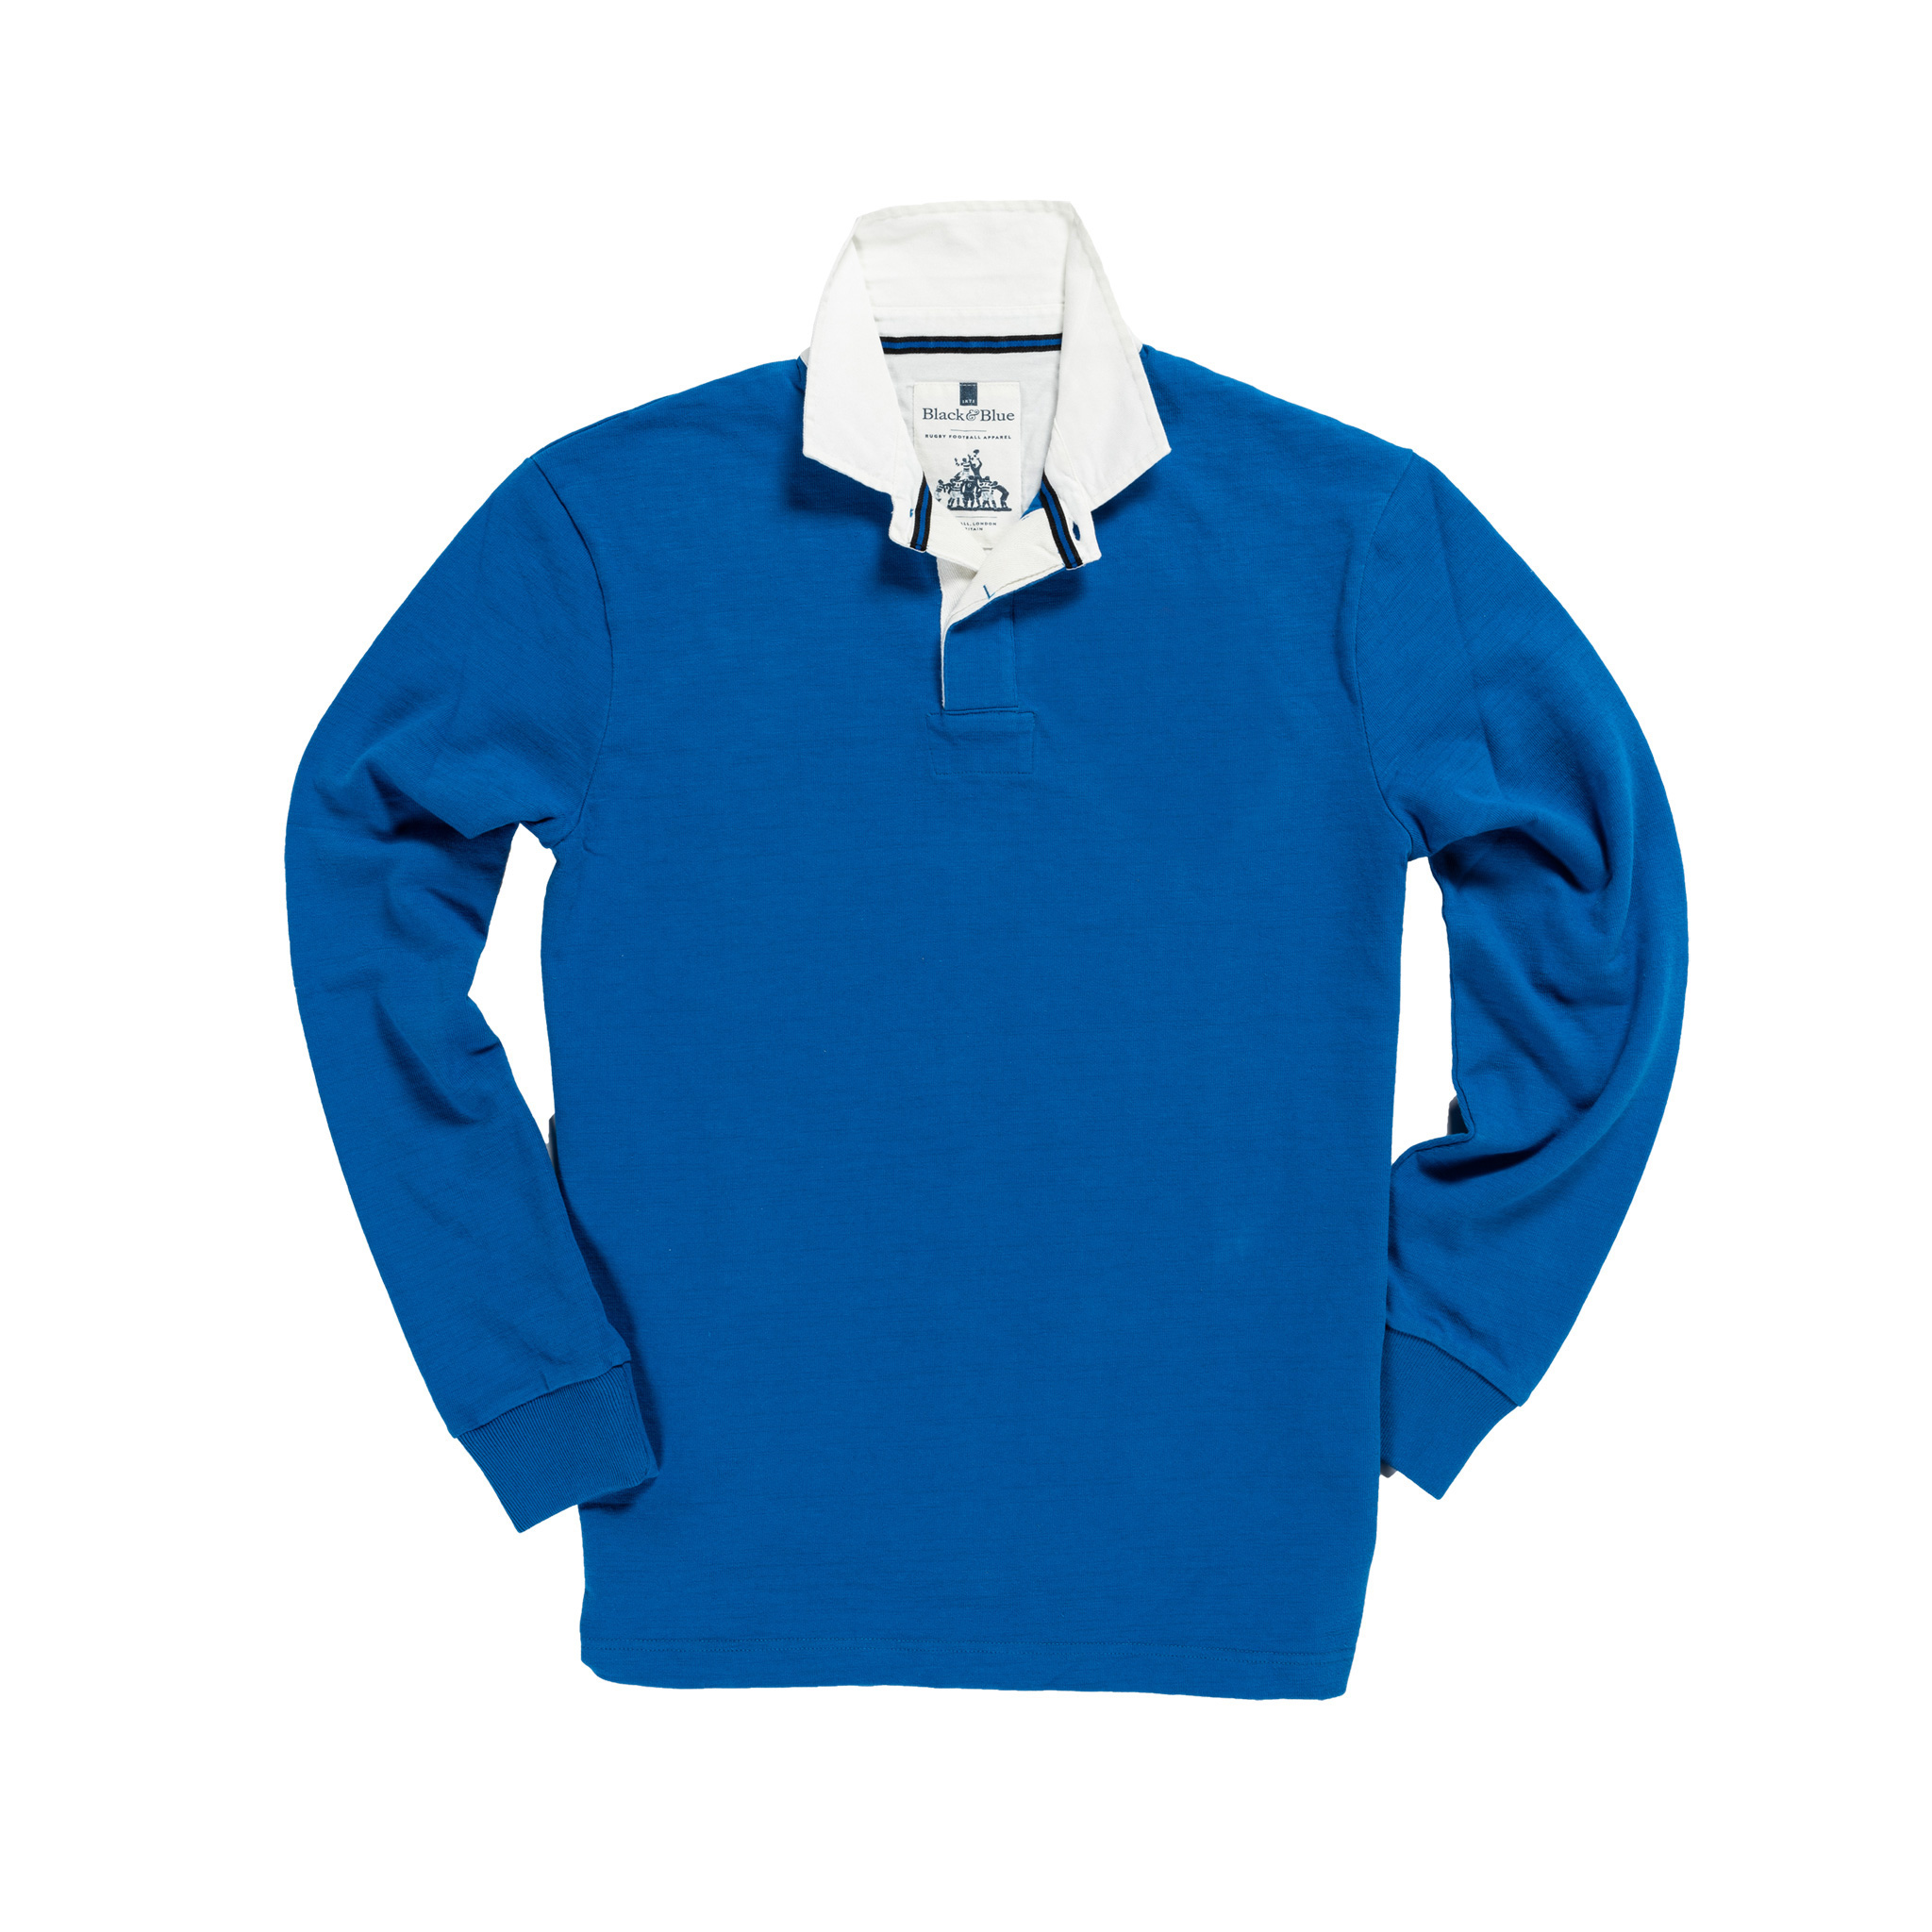 Classic Royal Blue 1871 Vintage Rugby Shirt